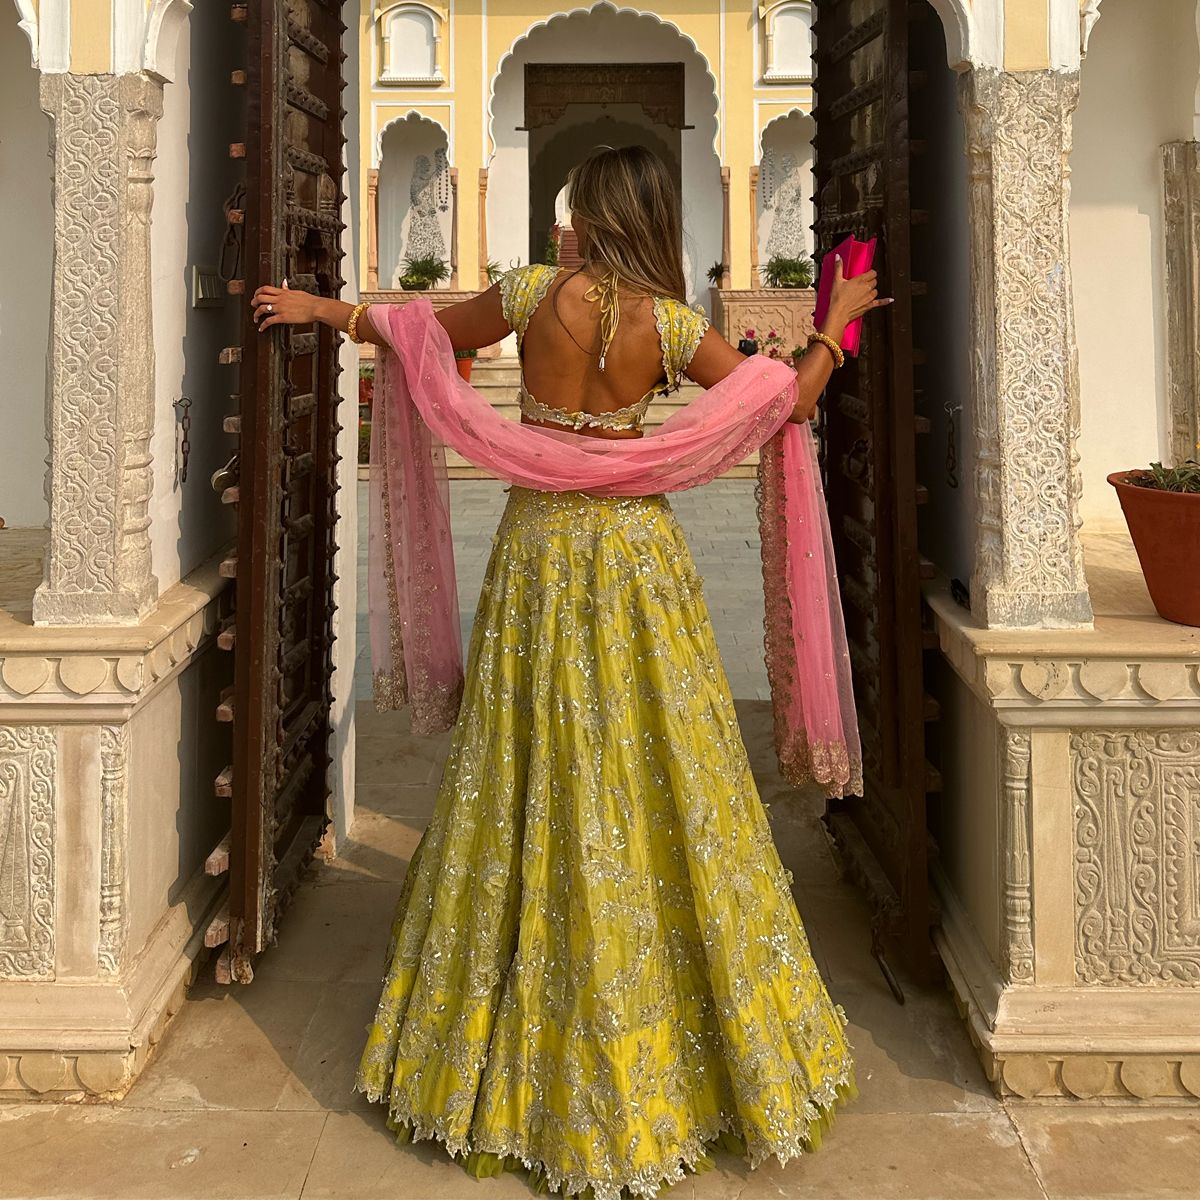 What You Should (and Shouldn’t) Wear As a Guest at An Indian Wedding